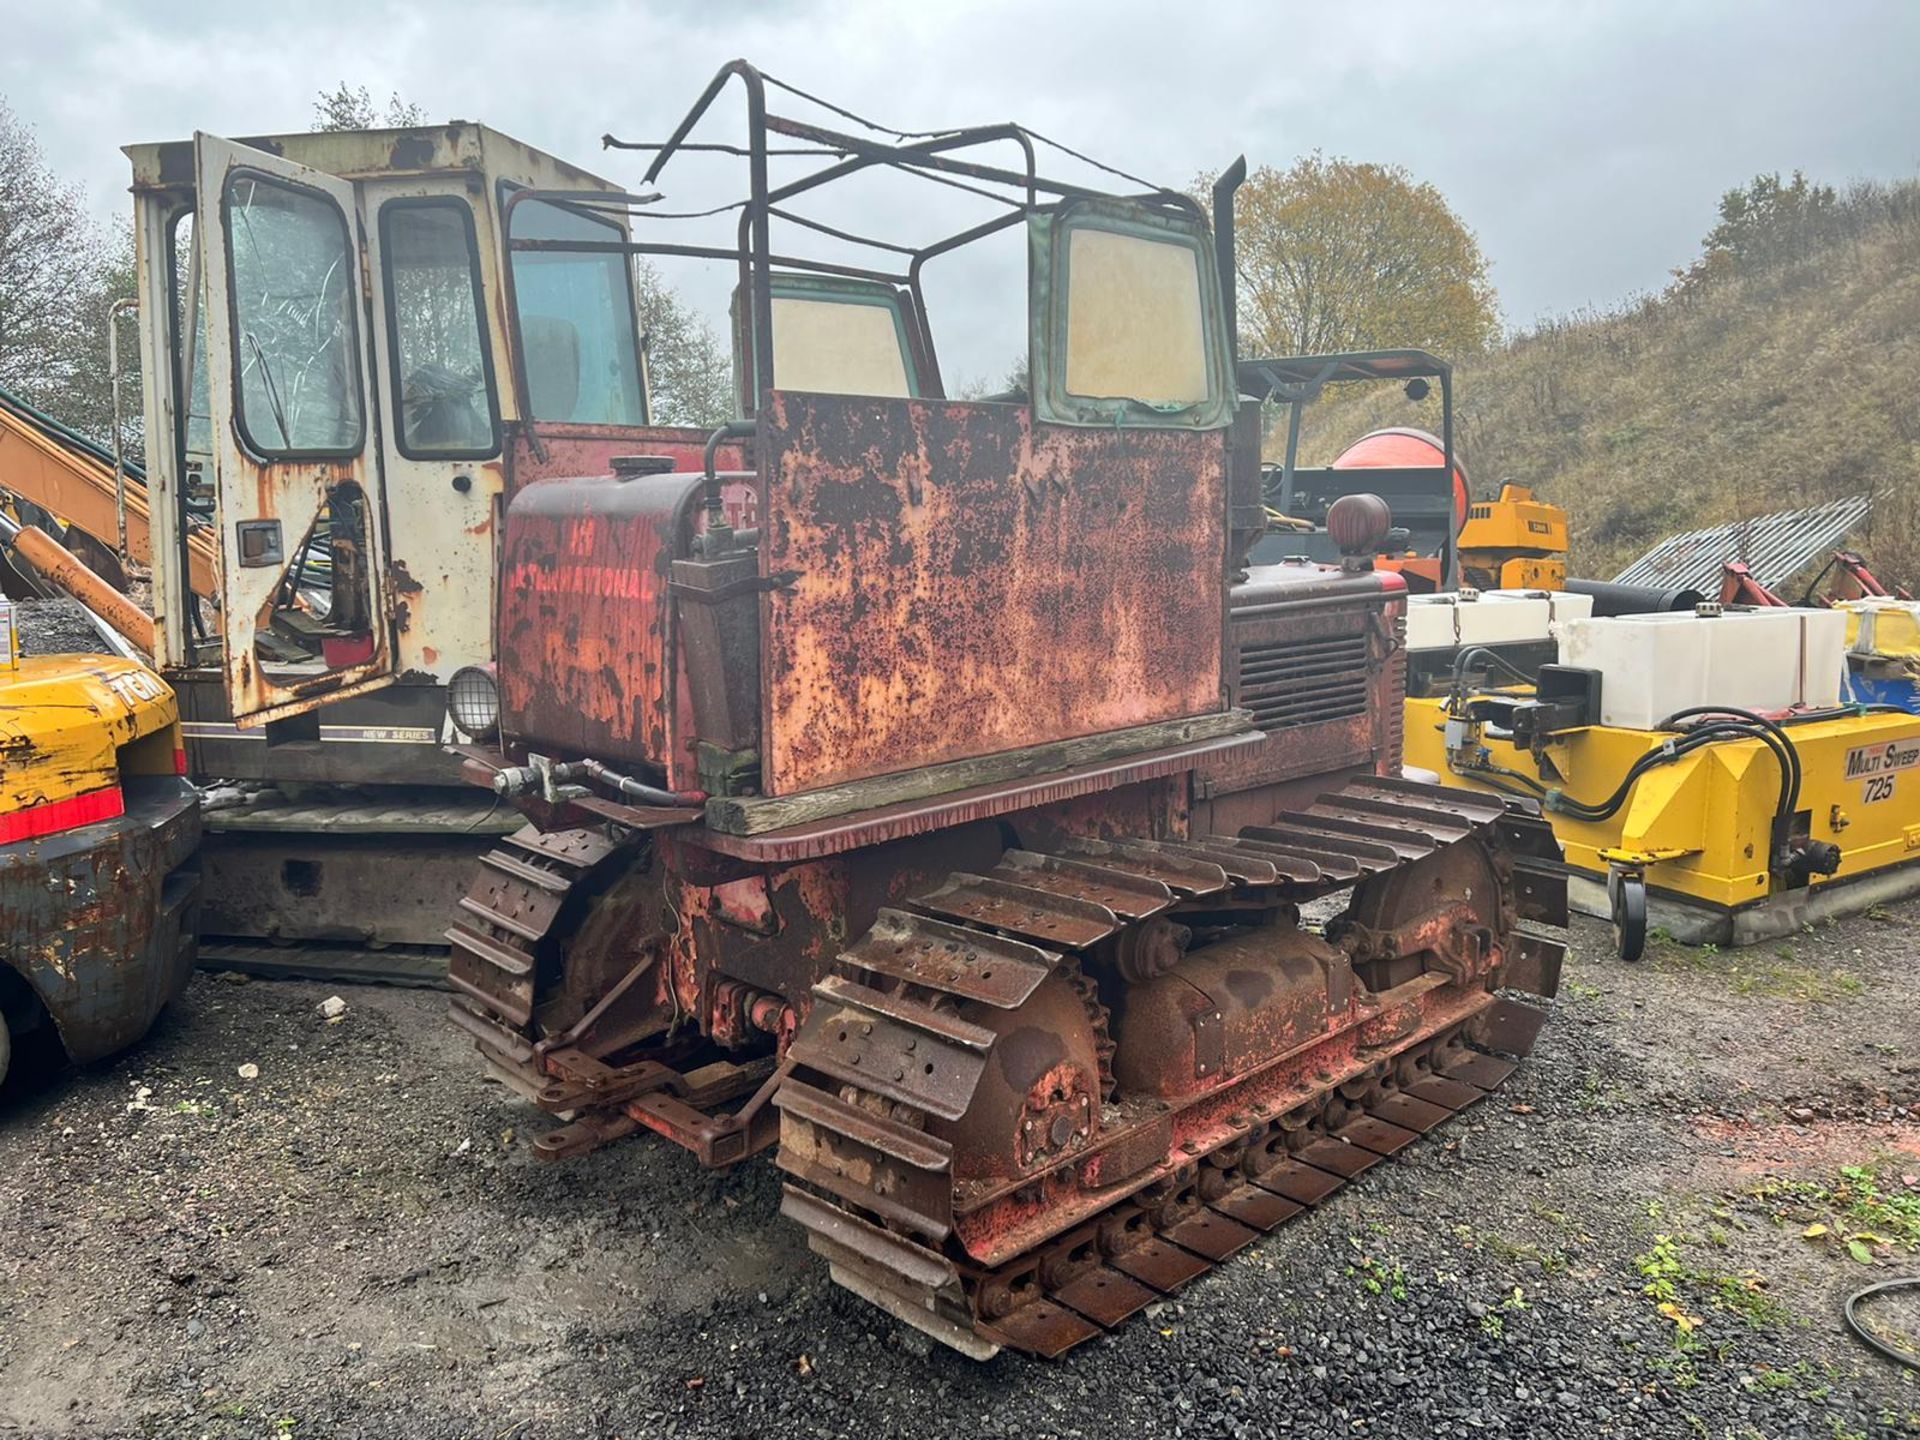 1955 INTERNATIONAL BTD6 39hp DIESEL TRACKED CRAWLER TRACTOR, RUNS AND DRIVES *PLUS VAT* - Image 2 of 11